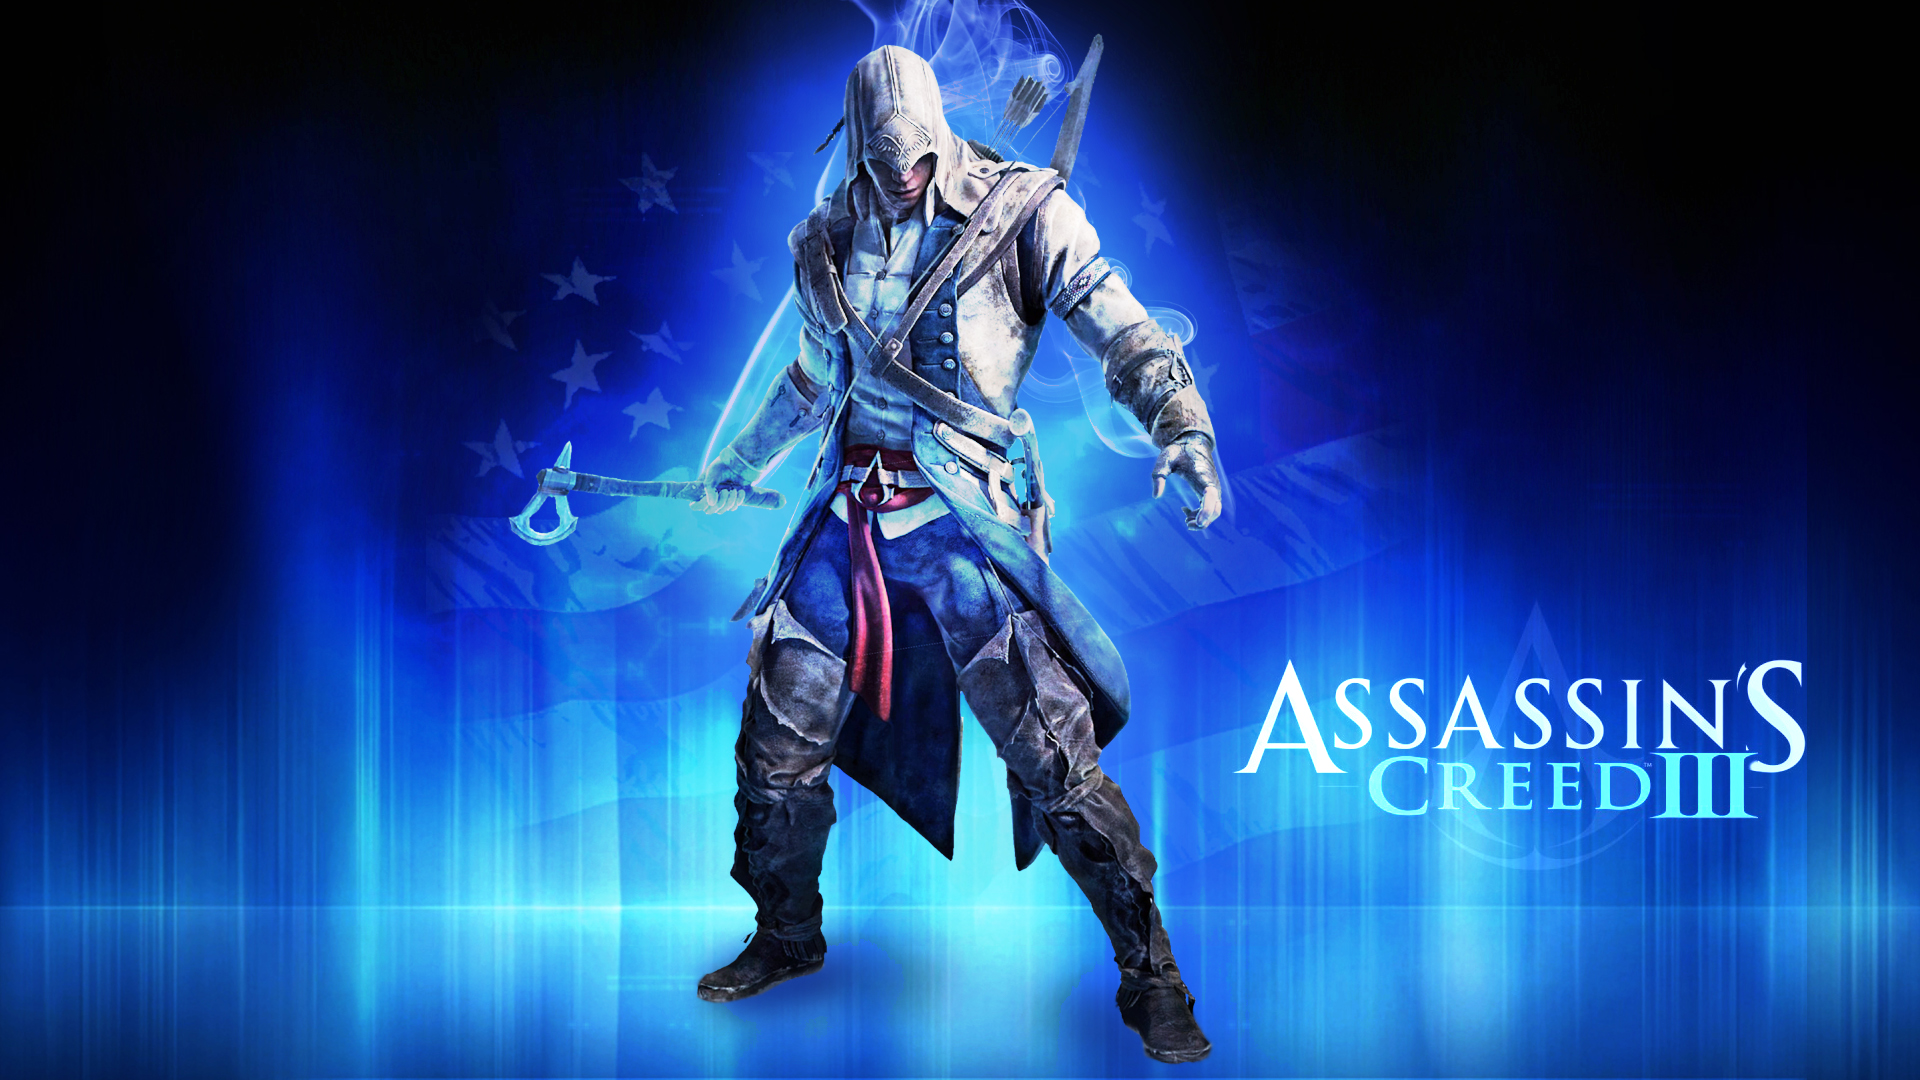 assassin's creed, assassin's creed iii, video game